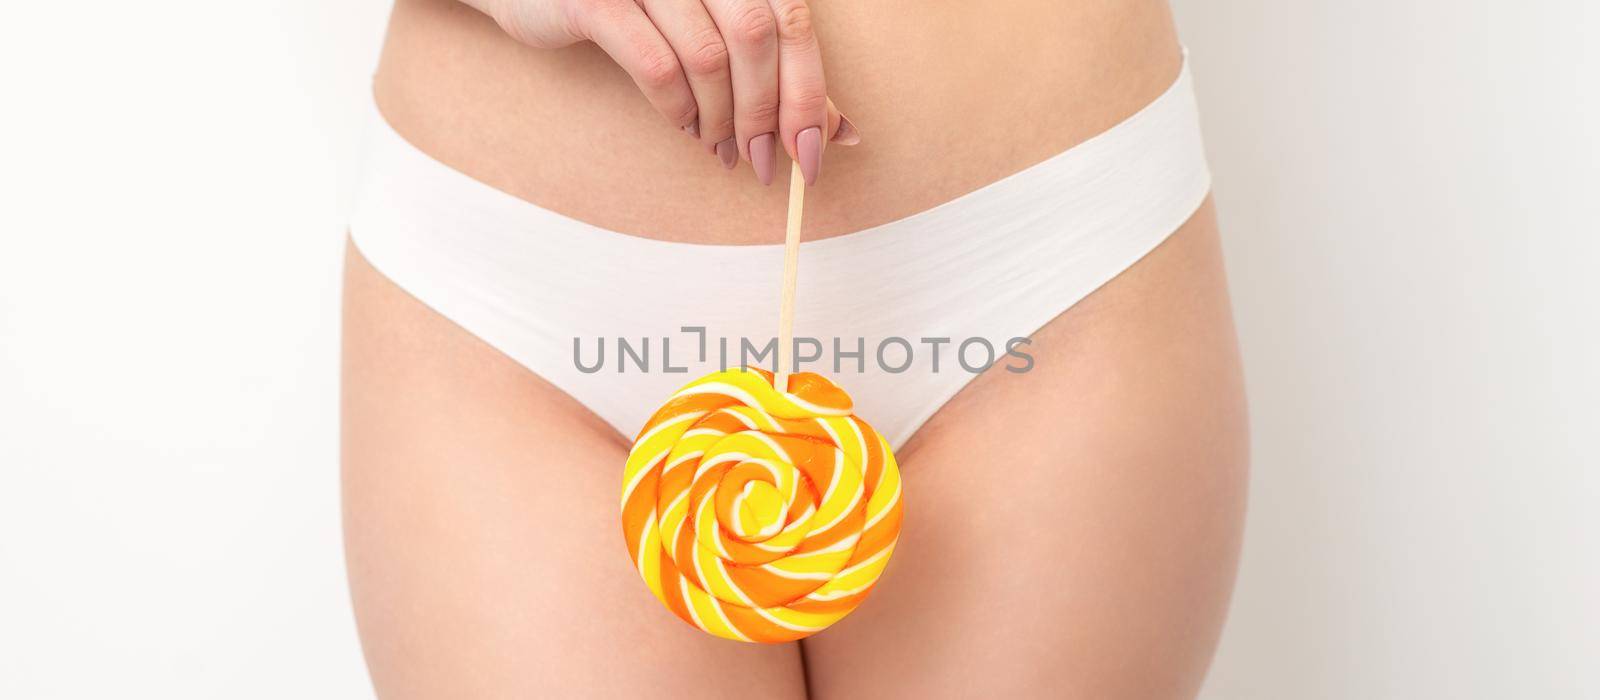 Hand of a woman wearing white panties holding lollipop on a stick covering the intimate area, the concept of intimate depilation, problems of intimate hygiene. by okskukuruza